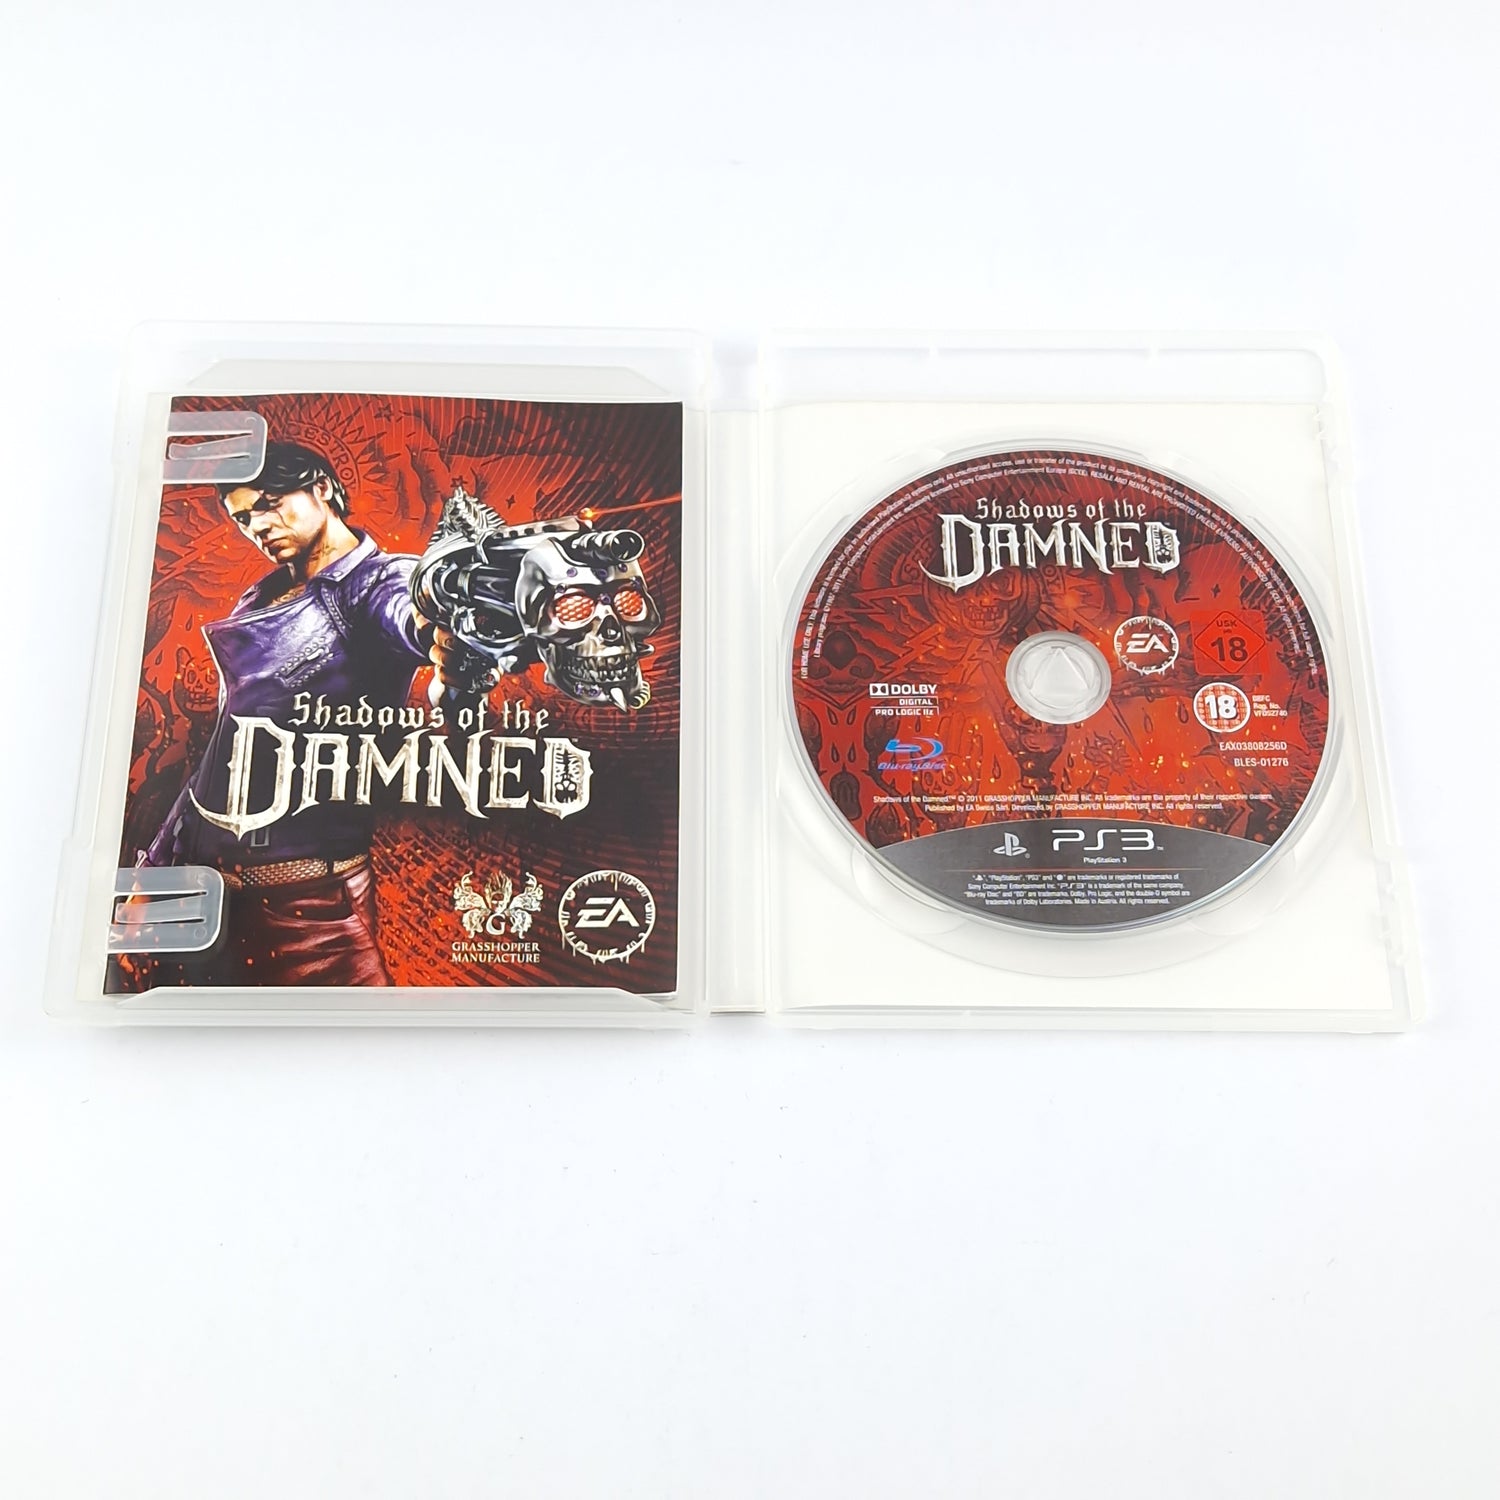 Playstation 3 game: Shadows of the Damned - OVP SONY PS3 USK18